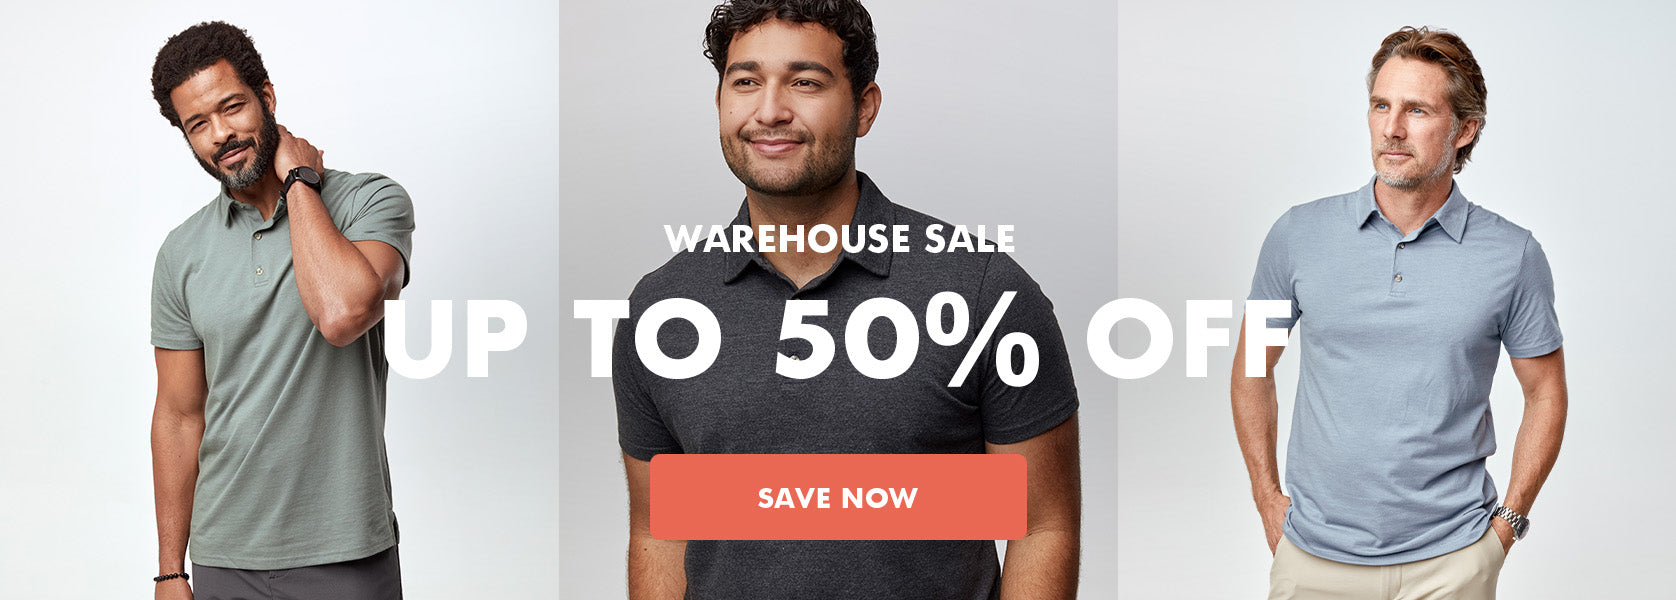 Warehouse Sale, up to 50% off | Fresh Clean Threads